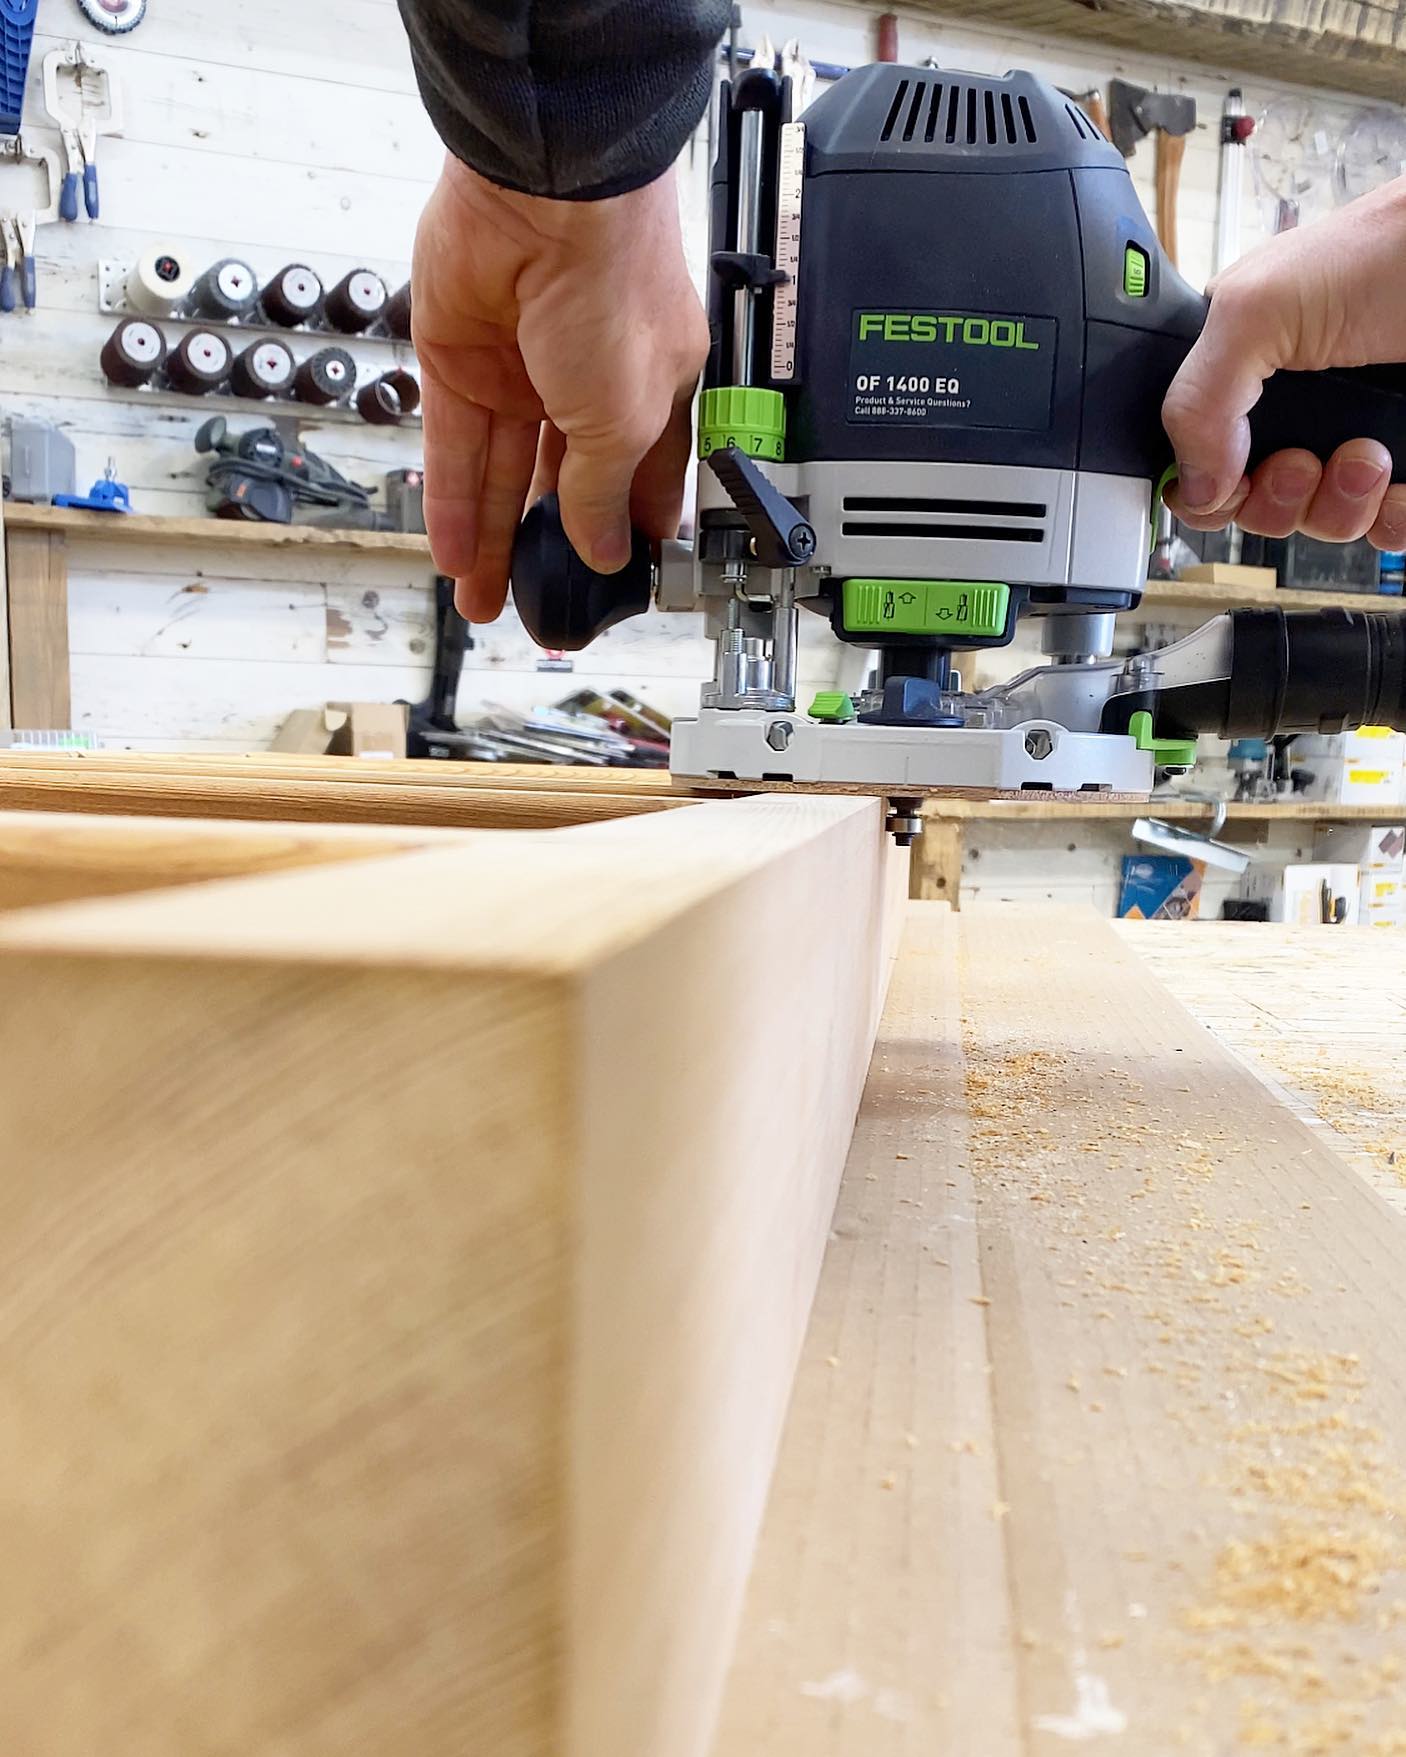 Festool router in action